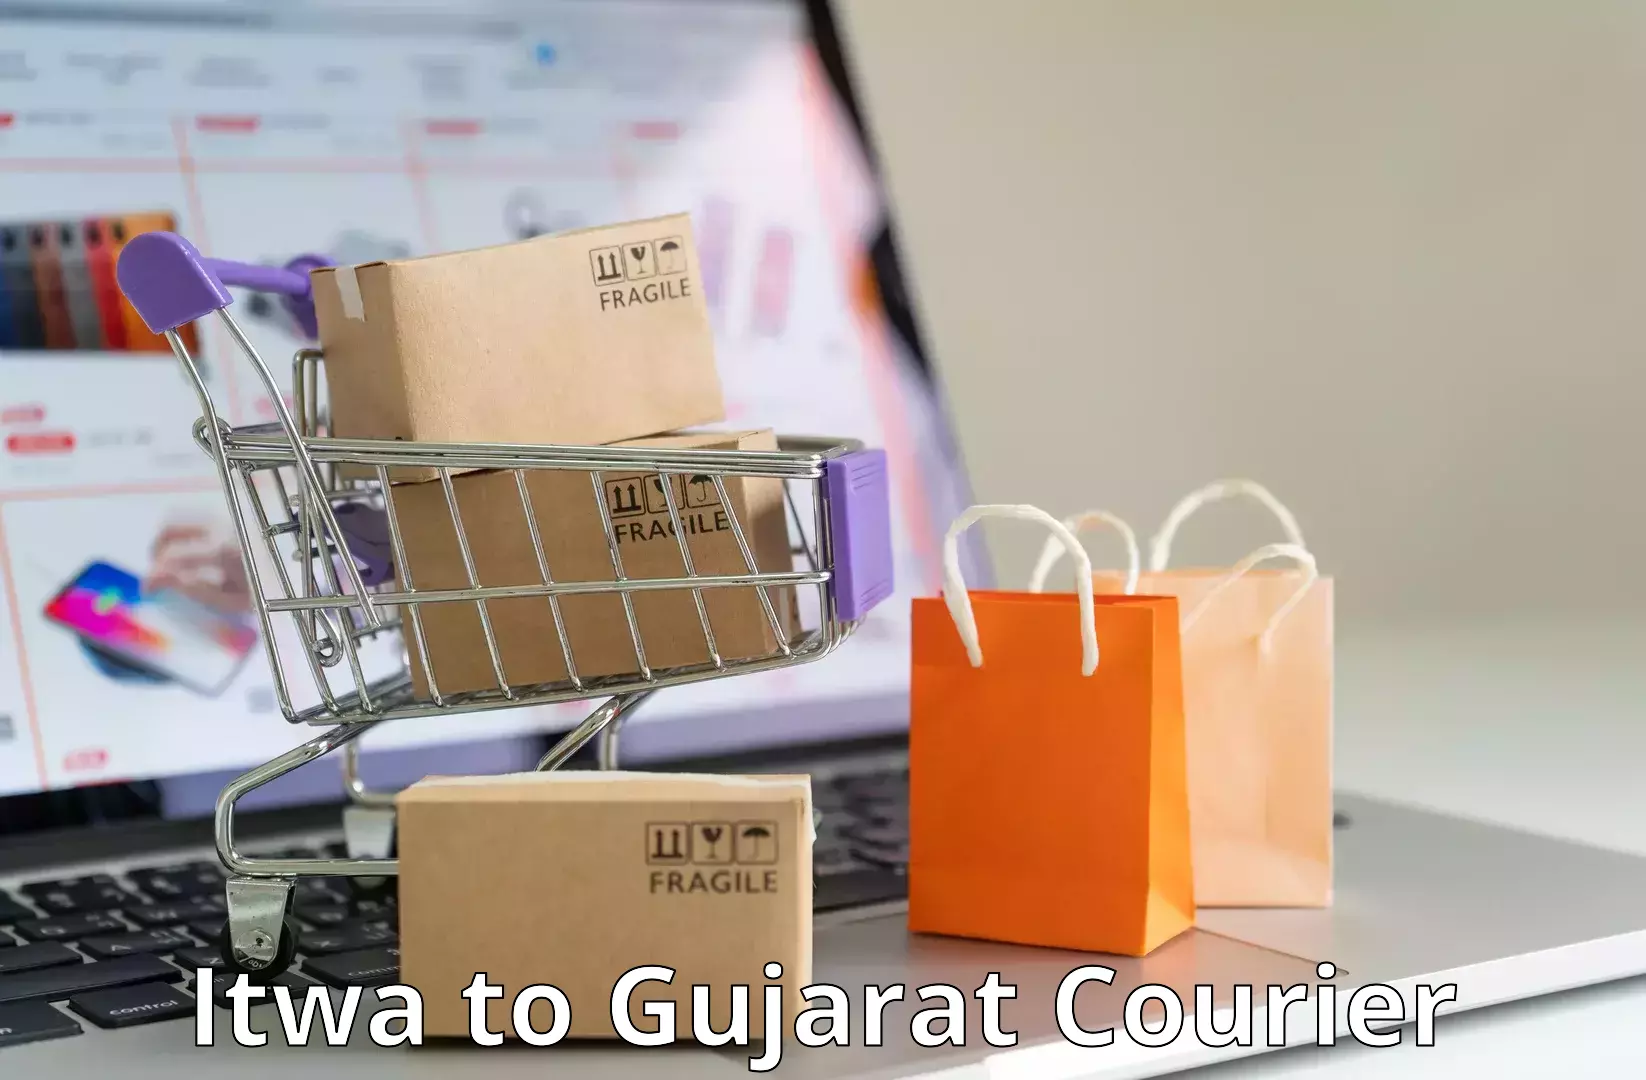 State-of-the-art courier technology Itwa to IIIT Vadodara